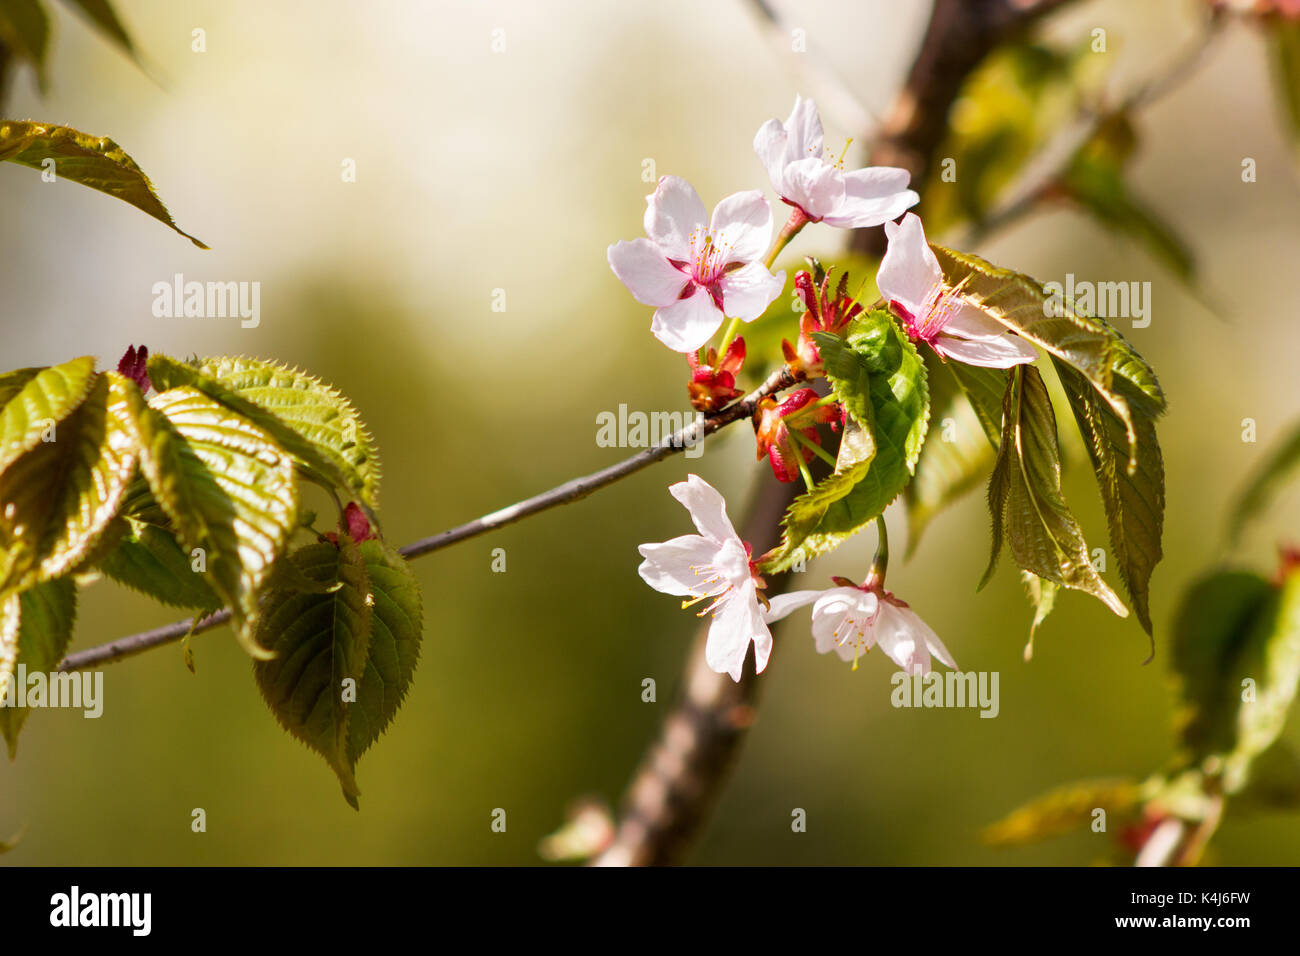 One blooming branch of sakura at blurred green background in rim lighthing Stock Photo